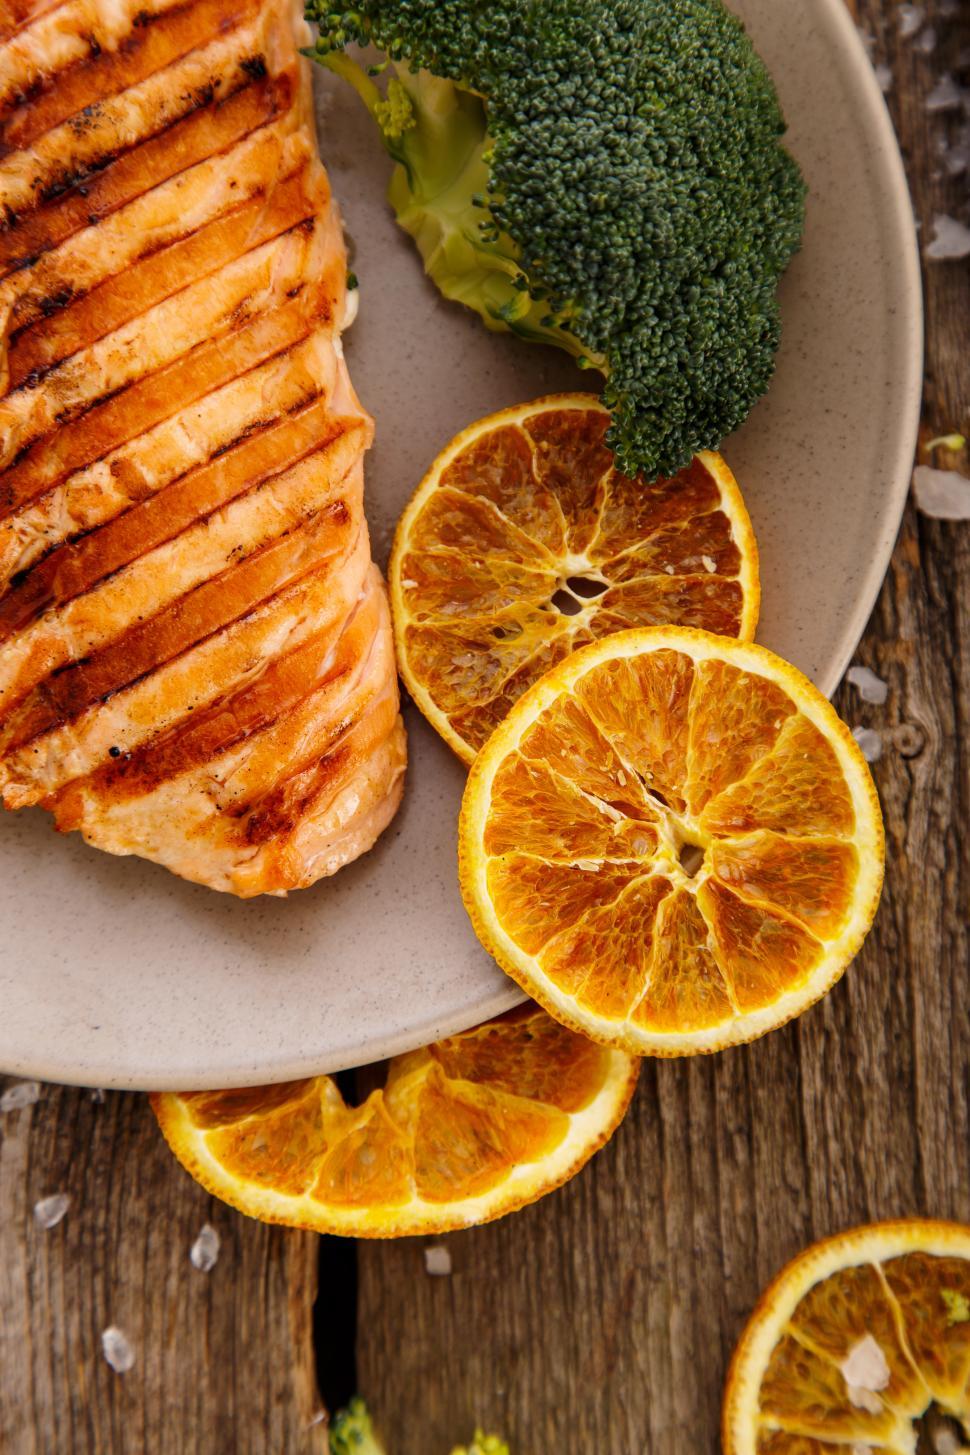 Free Image of Healthy grilled salmon dish 